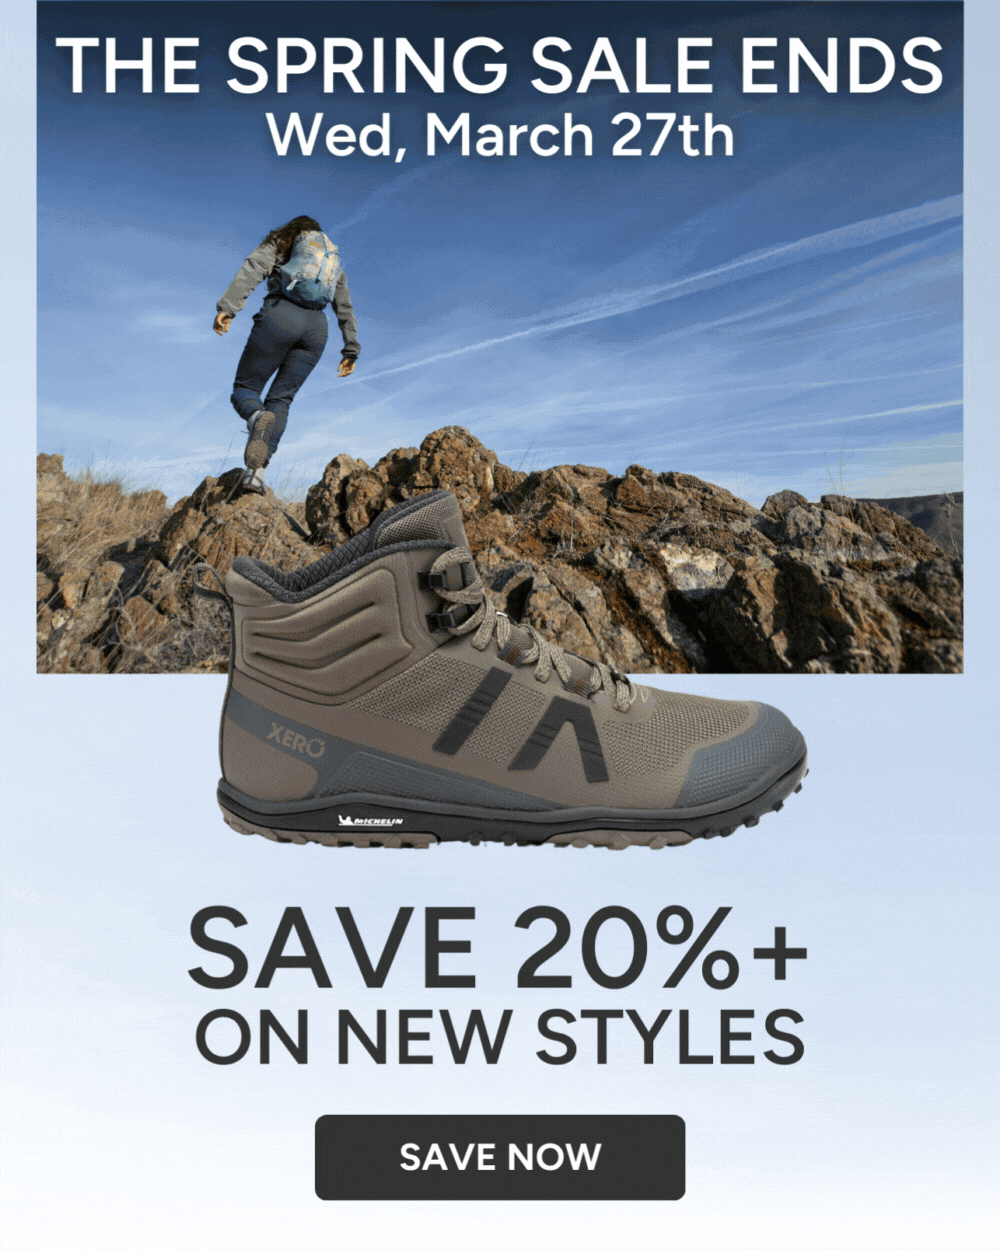 Save 20%+ on new styles. Save now.